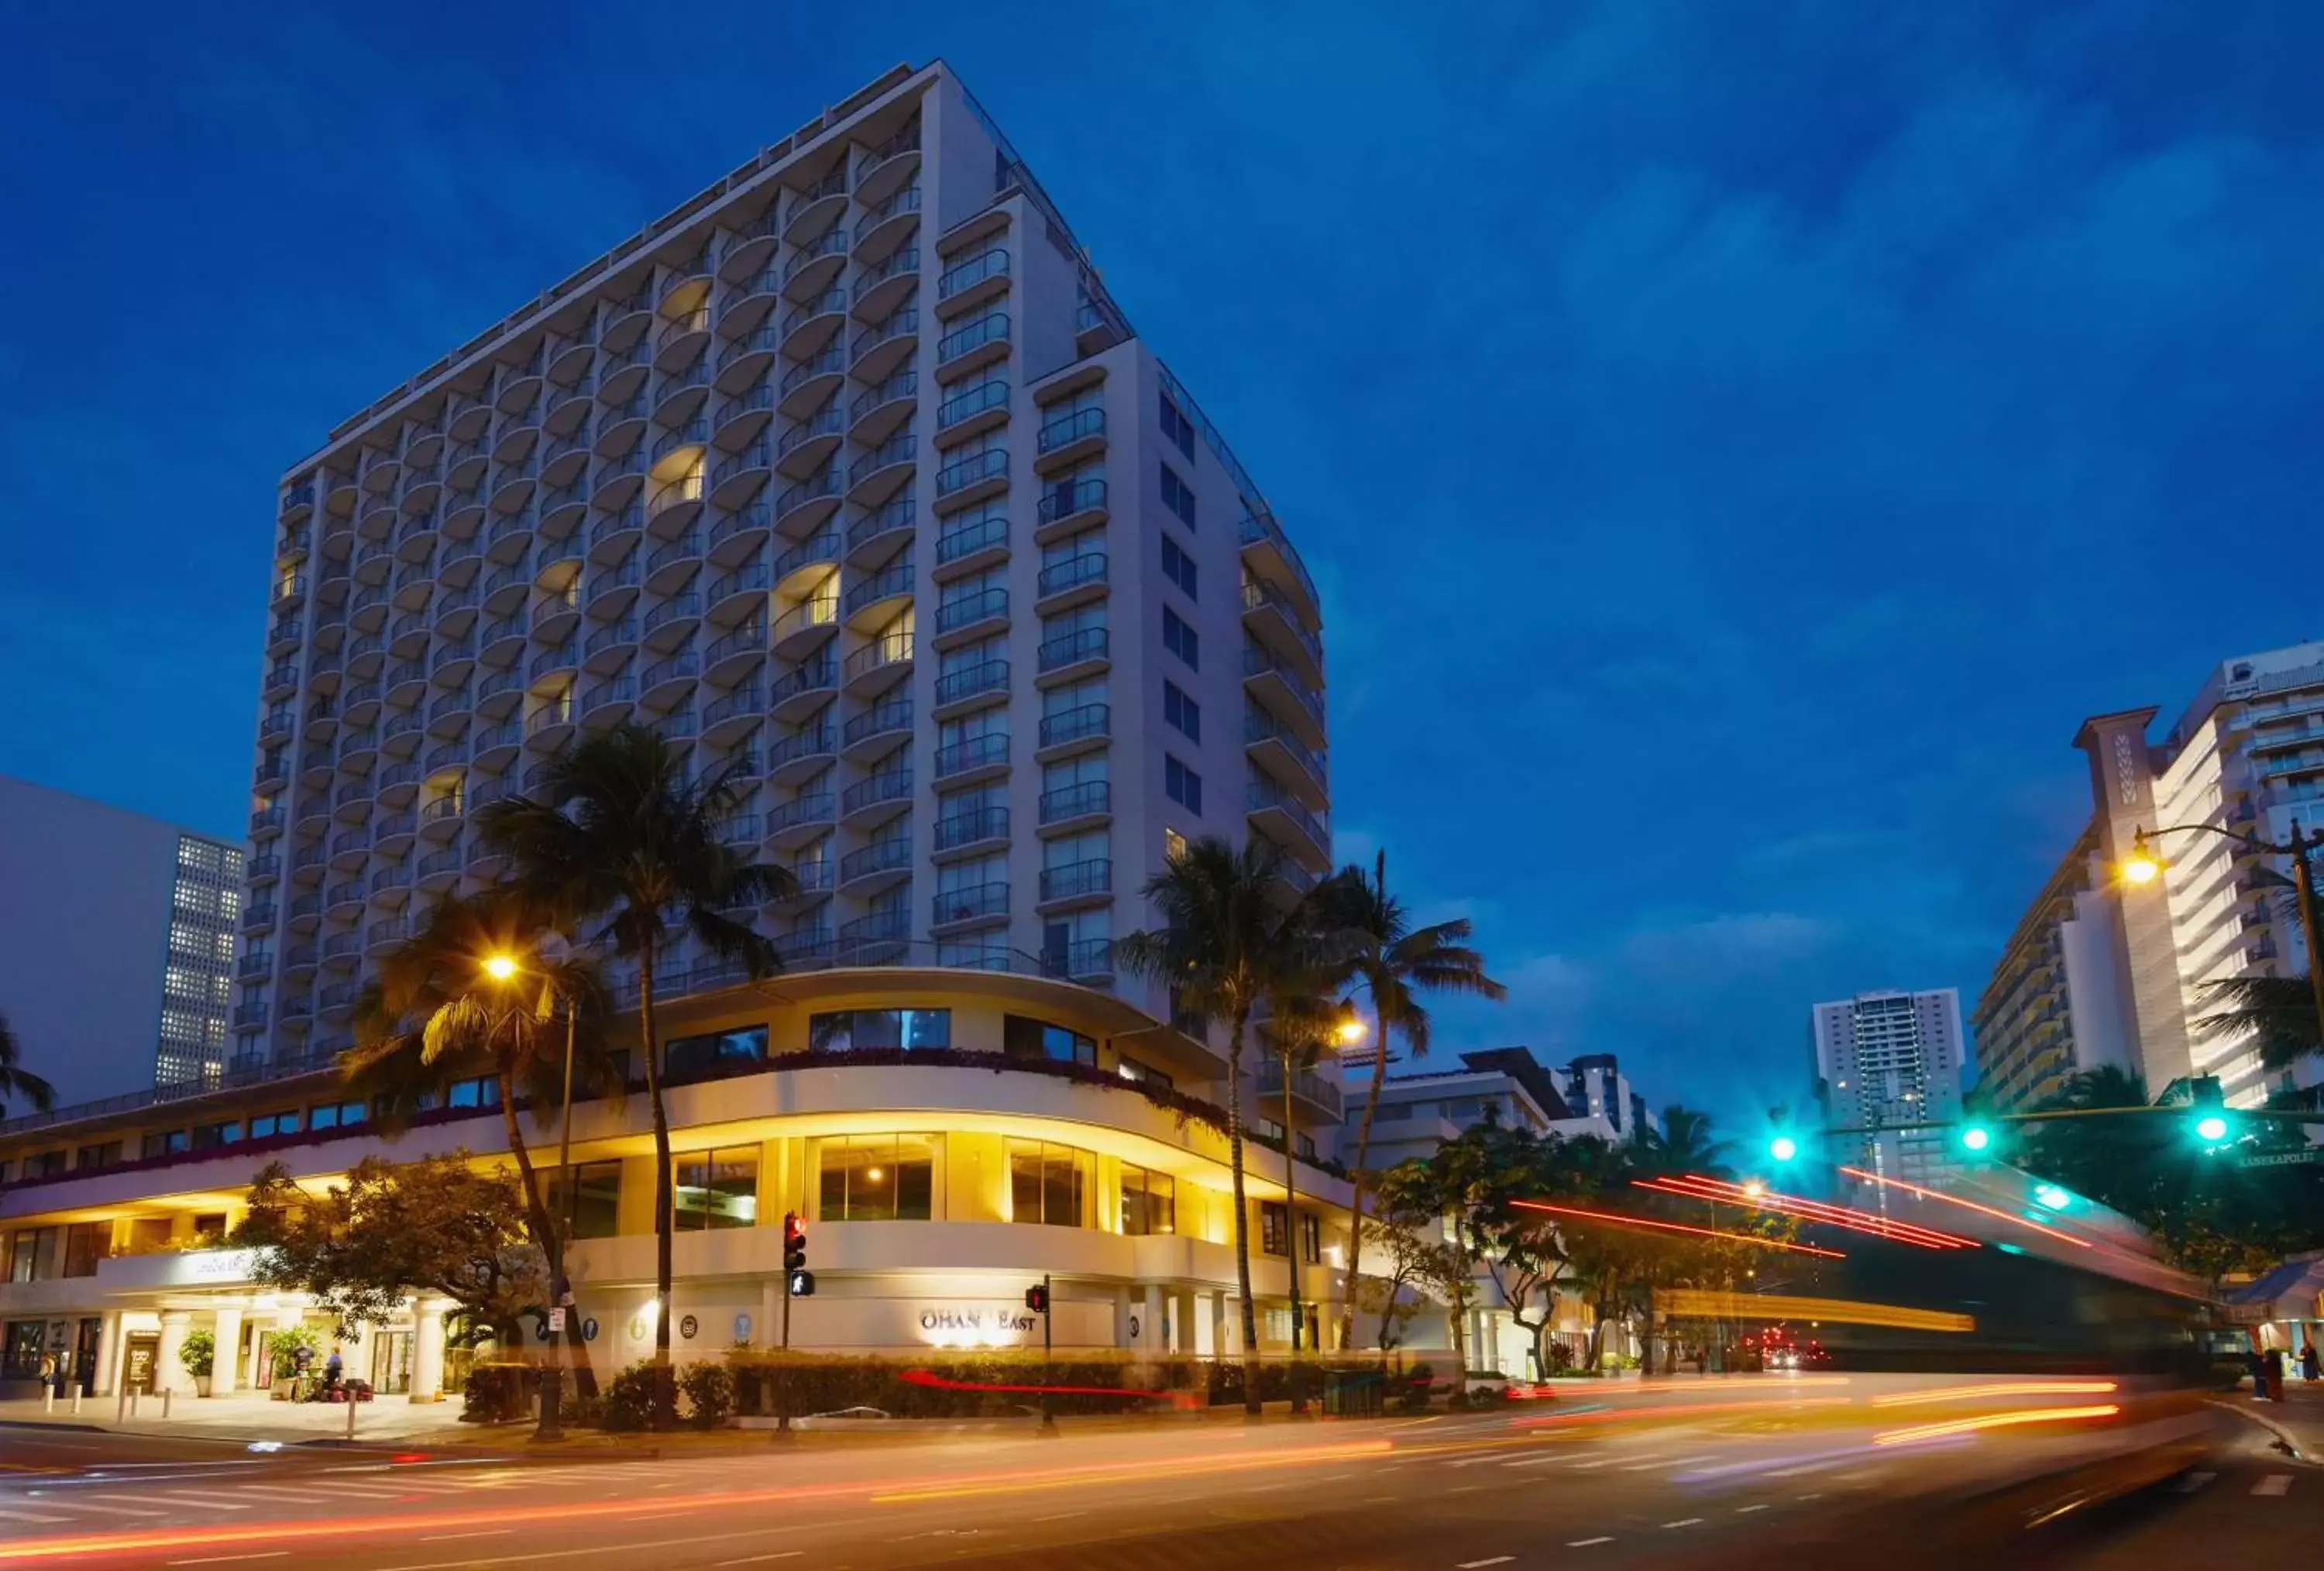 Property Building in OHANA Waikiki East by OUTRIGGER